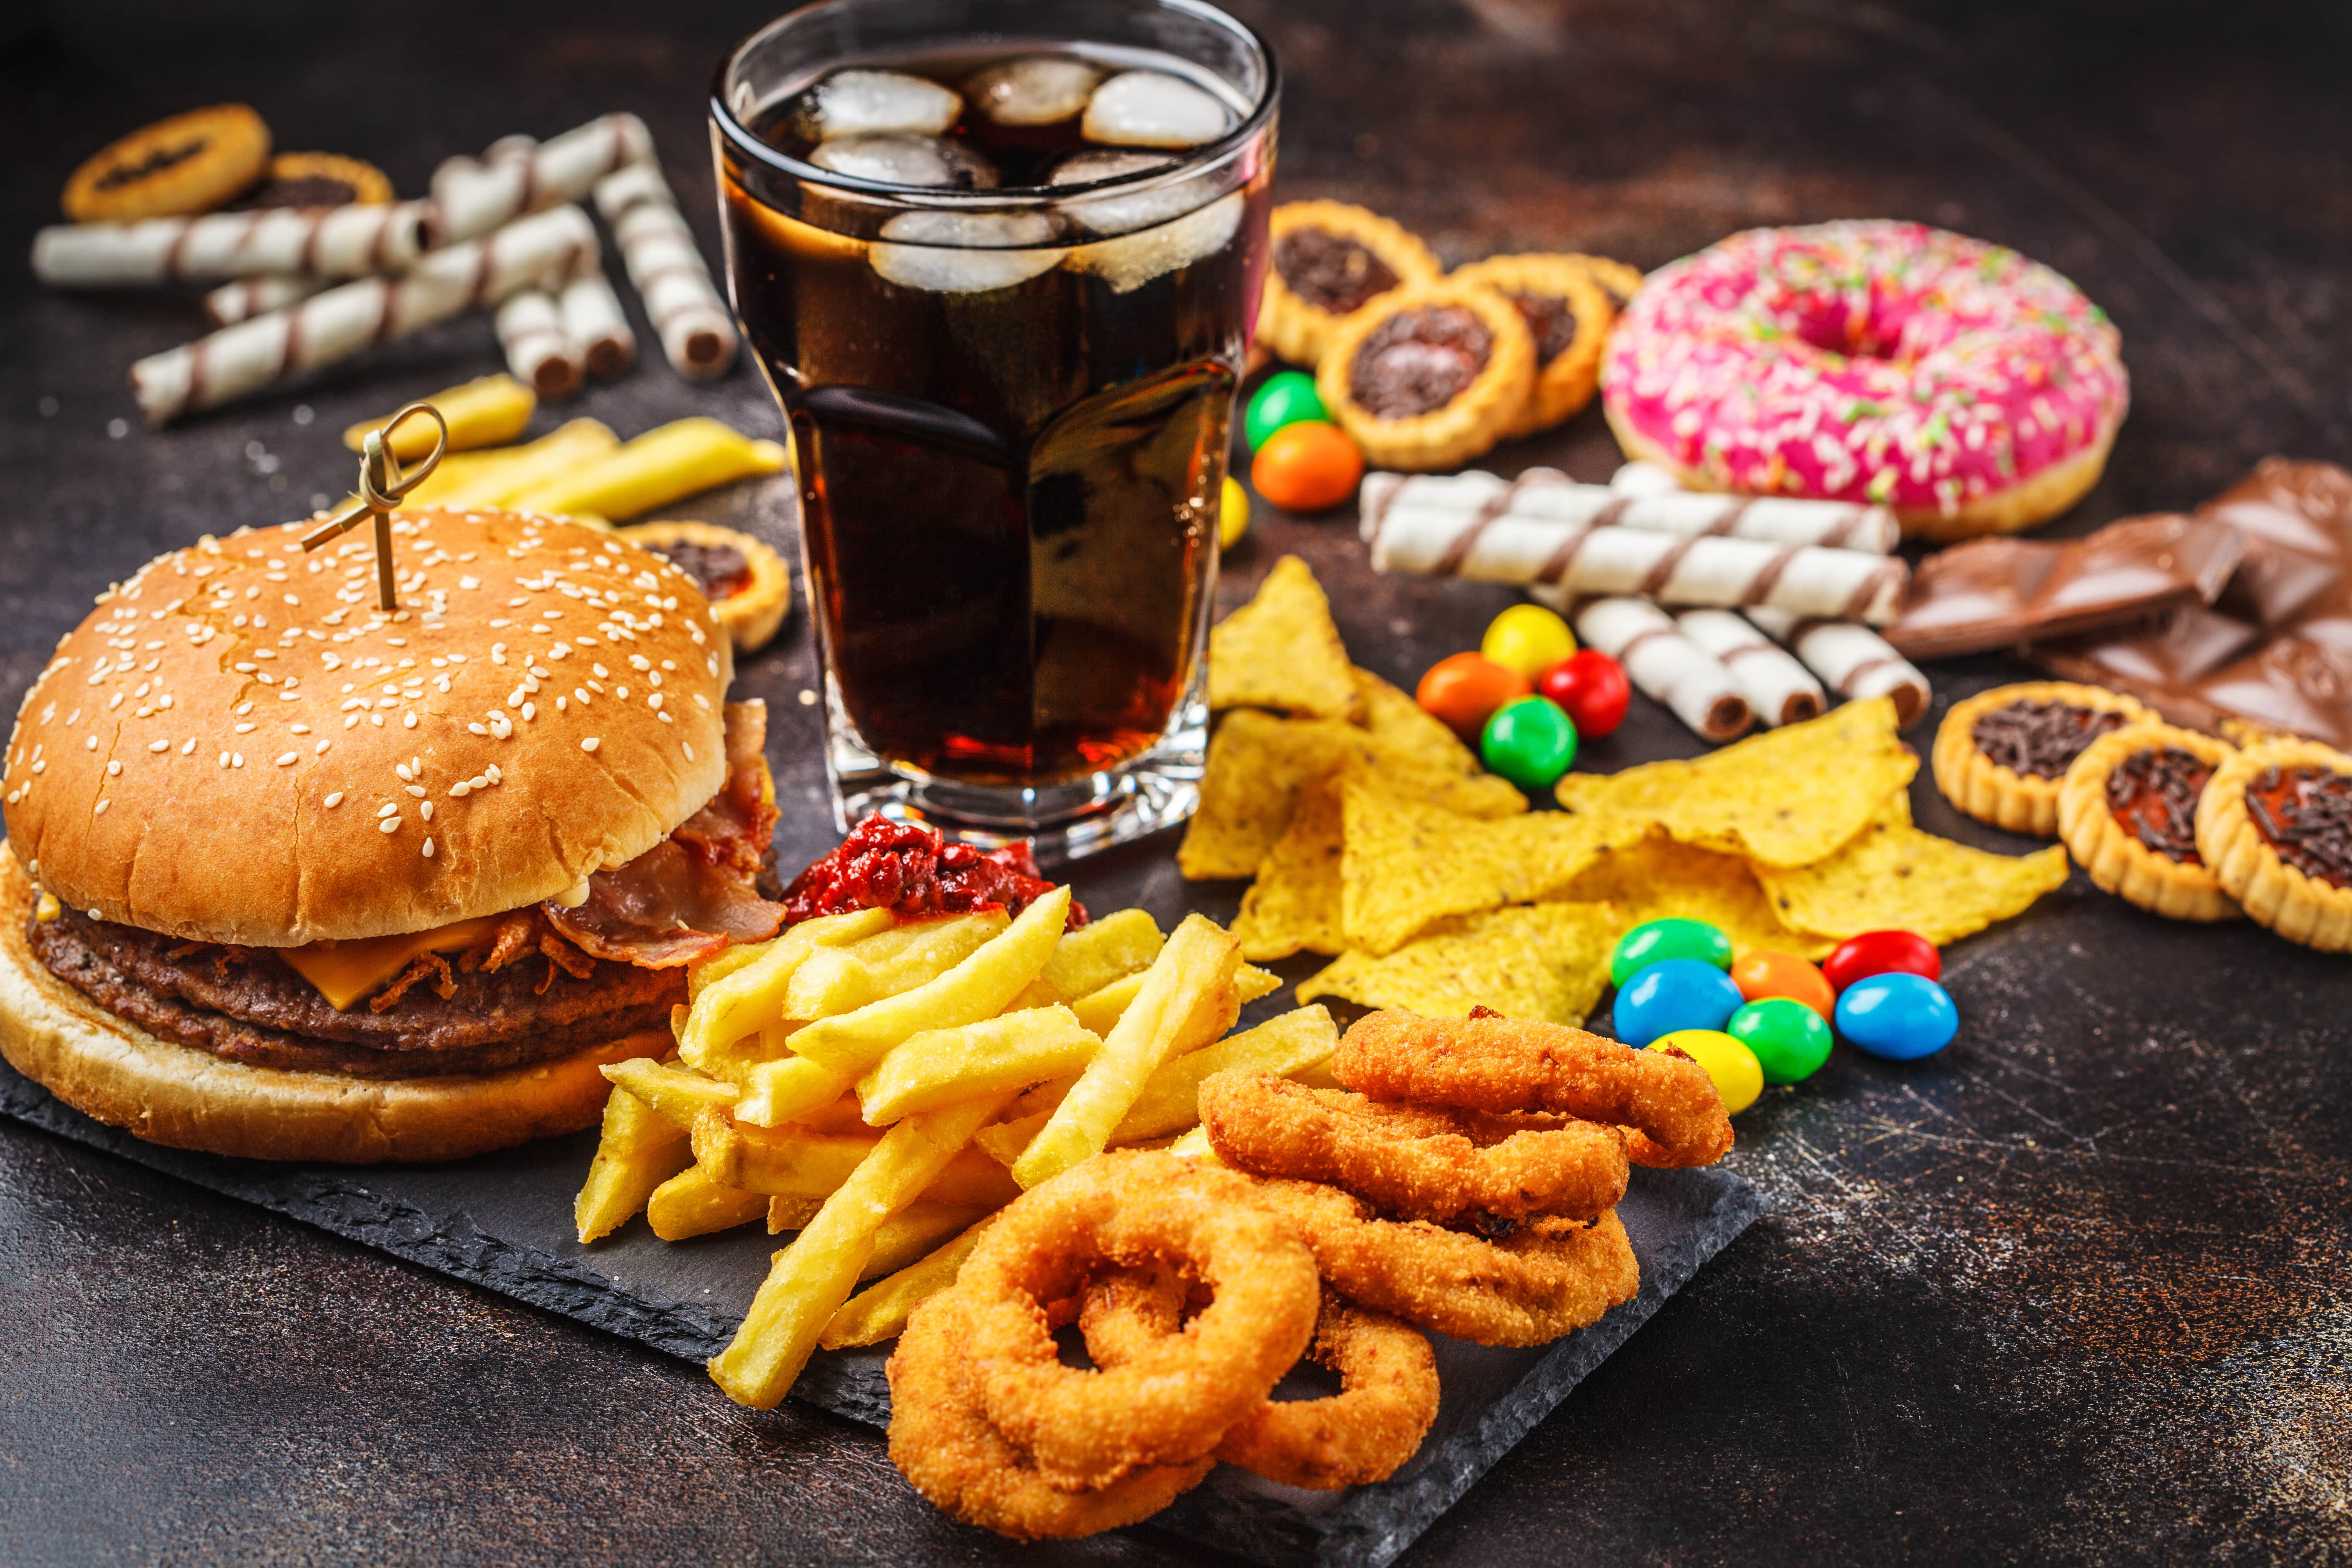 Glass of cola stands among an array of takeaway junk food, cakes and sweets